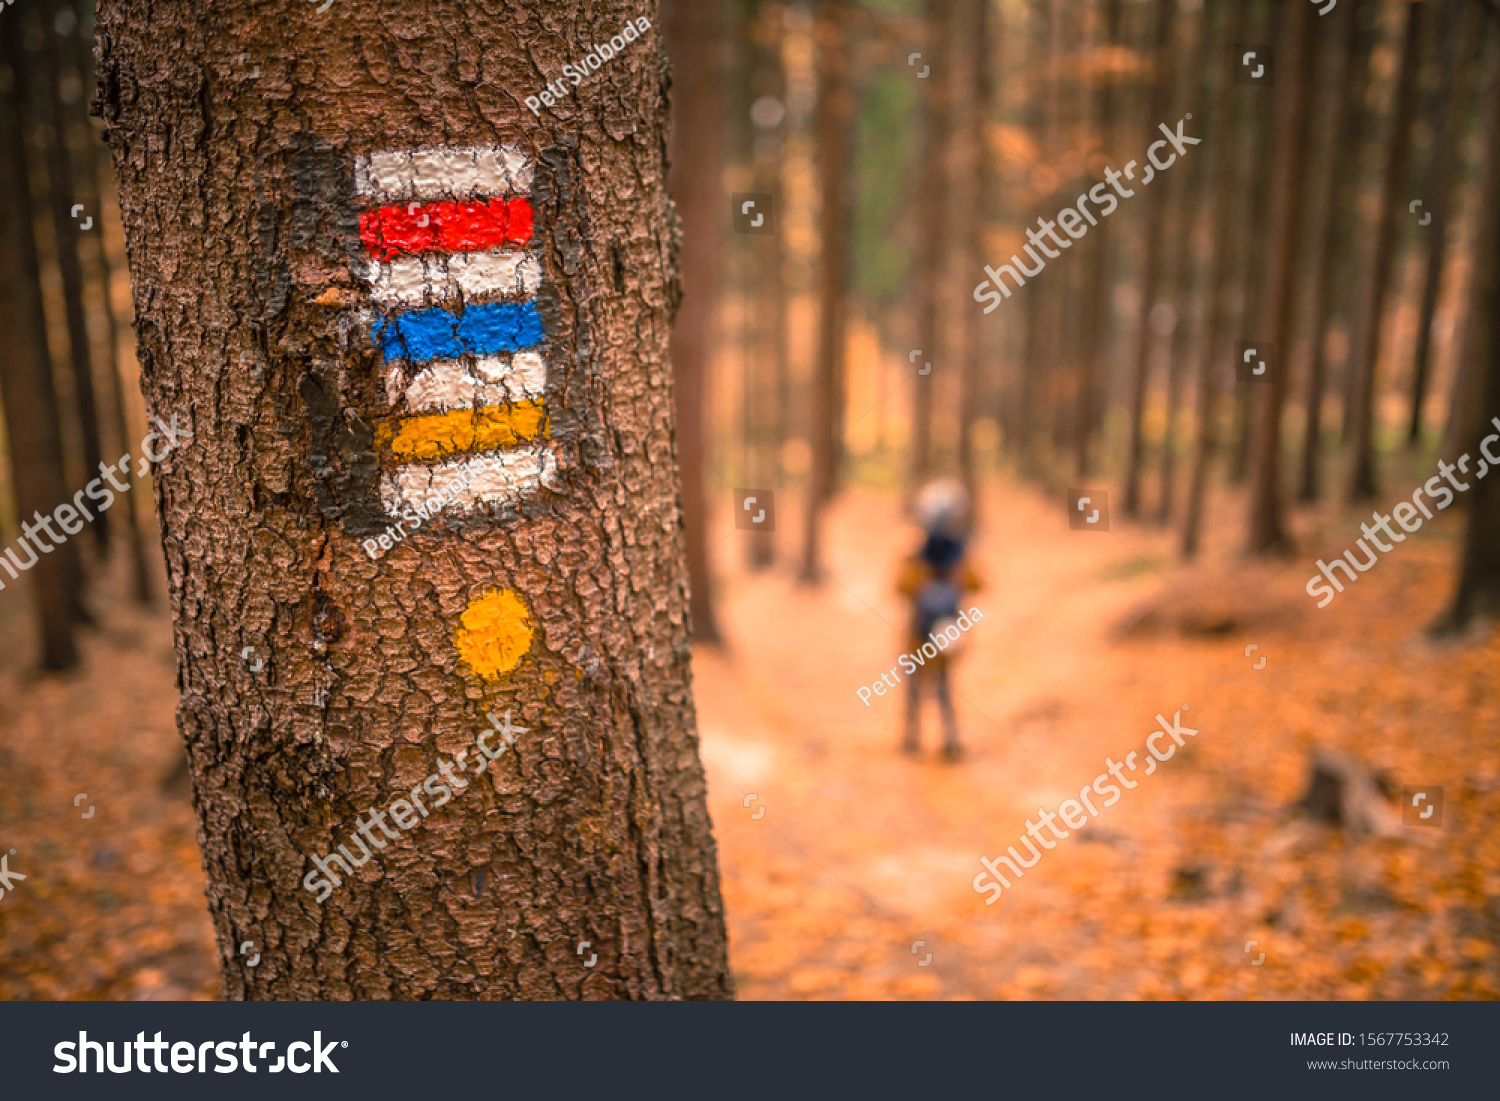 Touristic sign or mark on tree next to touristic path with female tourist in background. Nice autumn scene. Forrest trail. #1567753342